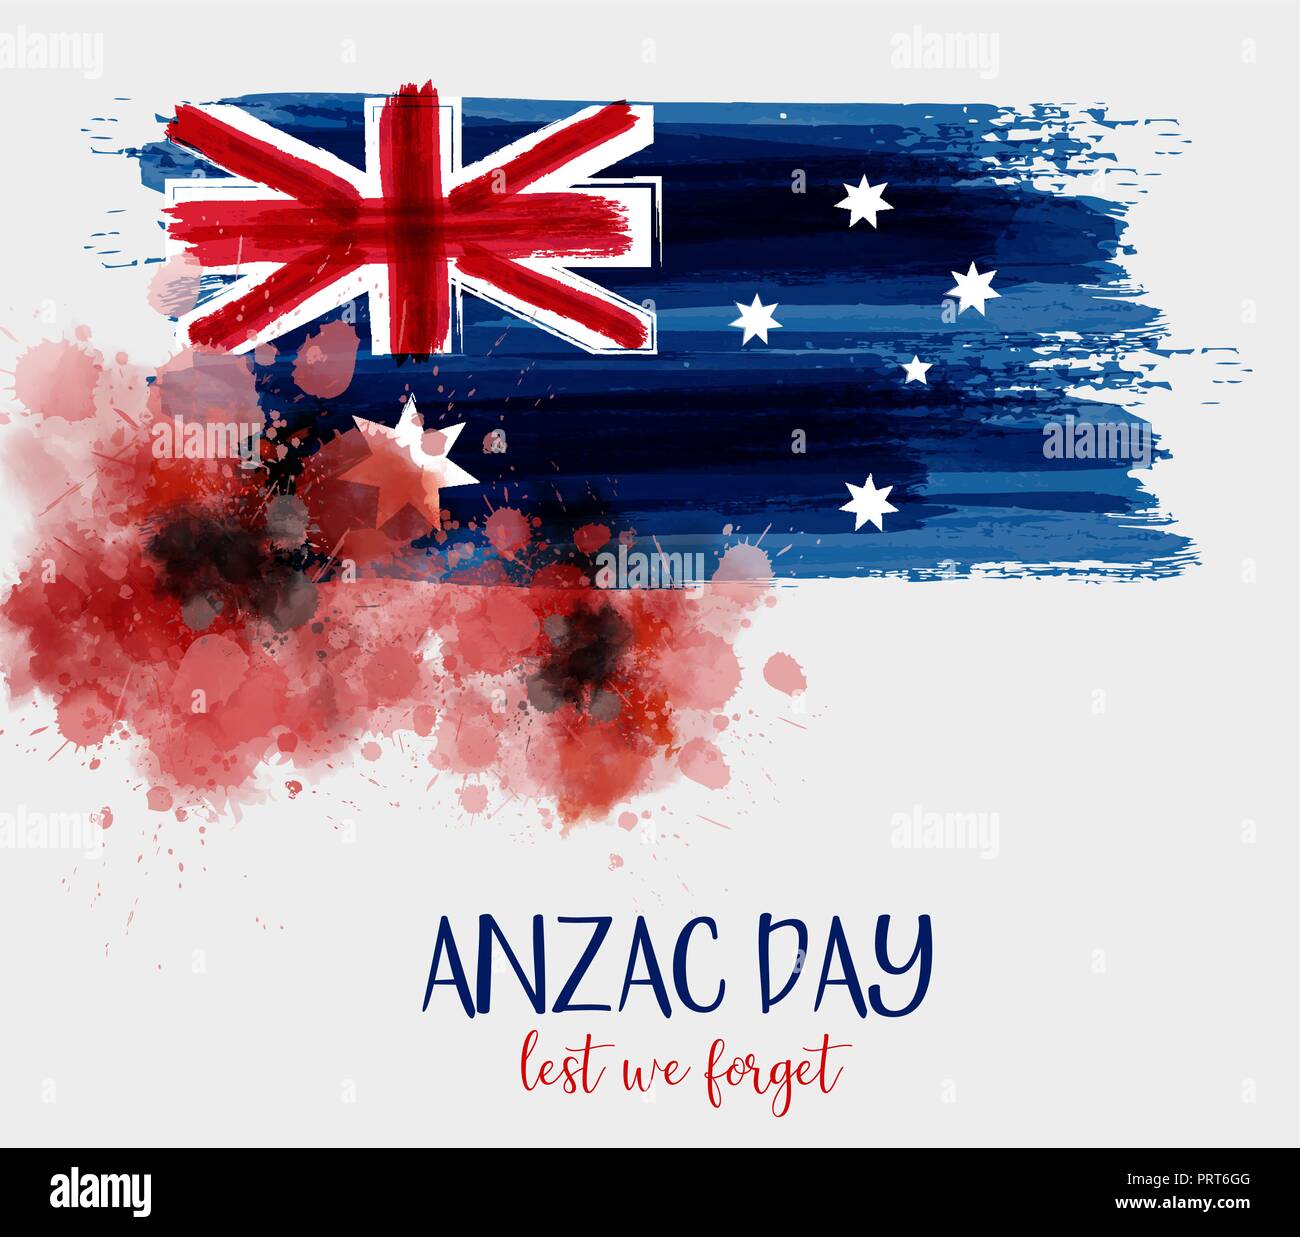 Anzac Day background with grunge watercolor Australia flag and two red poppy flowers. Remembrance symbol. Lest we forget. Stock Vector